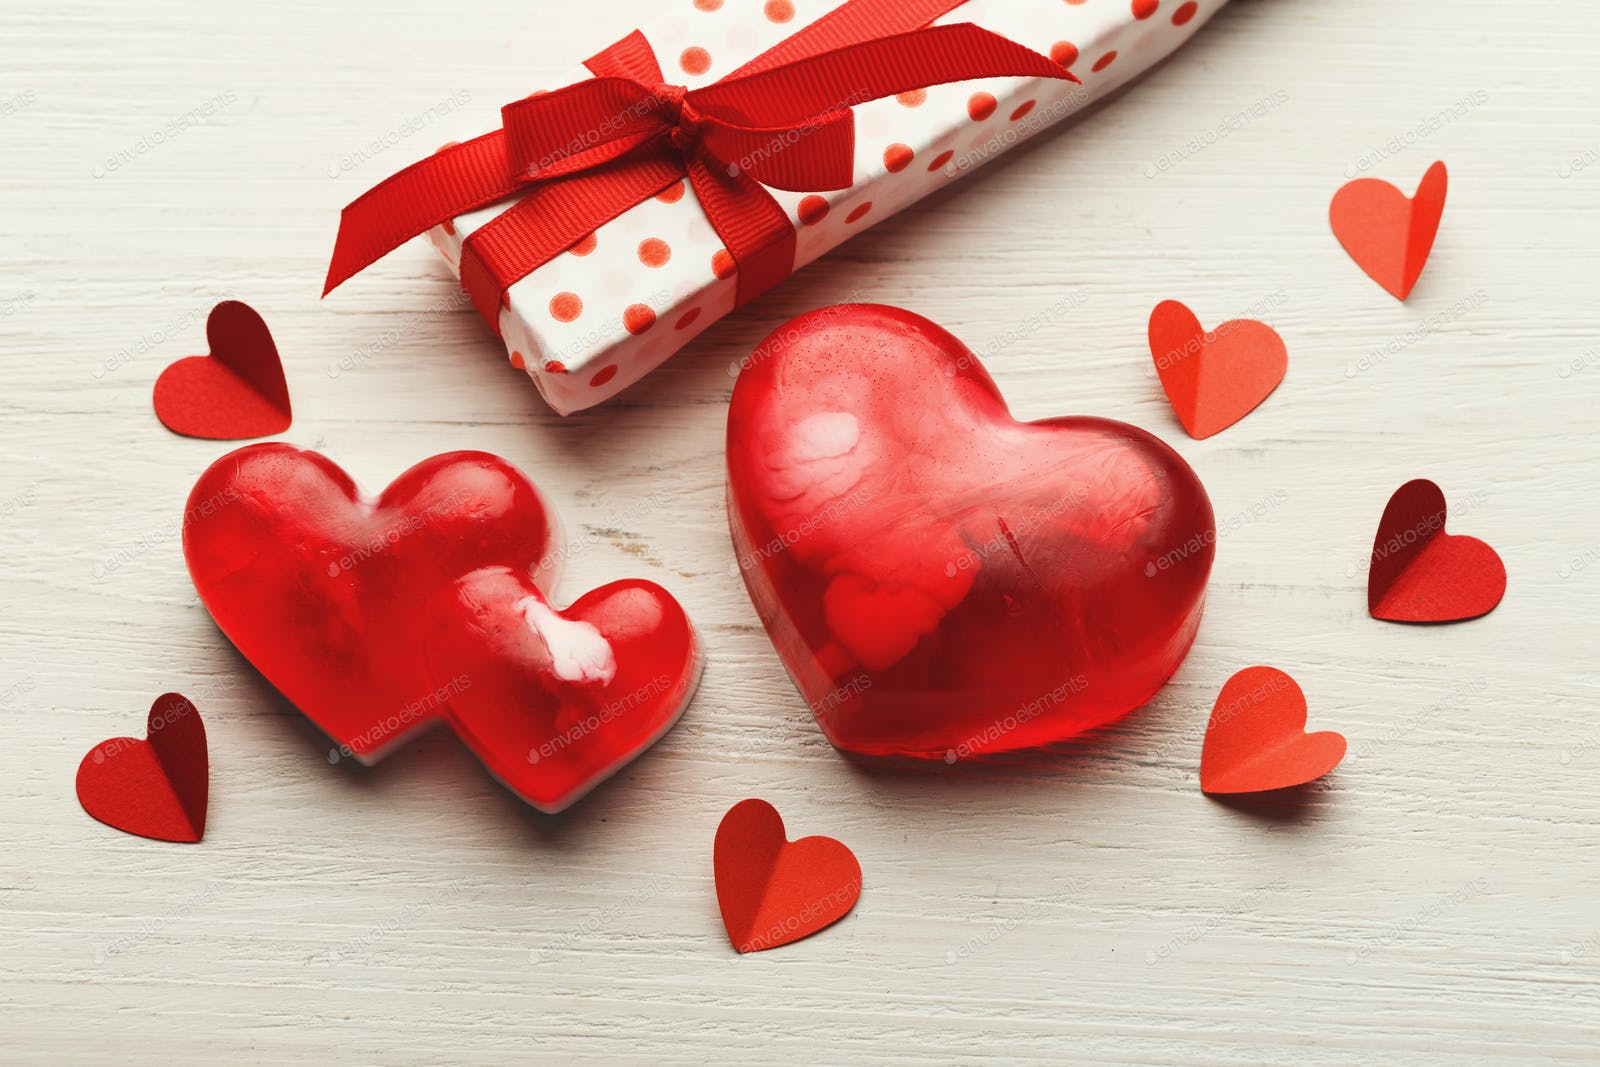 Valentine Day Background, Handmade Hearts On Wood With Copy Space Photo By Prostock Studio On Envato Elements